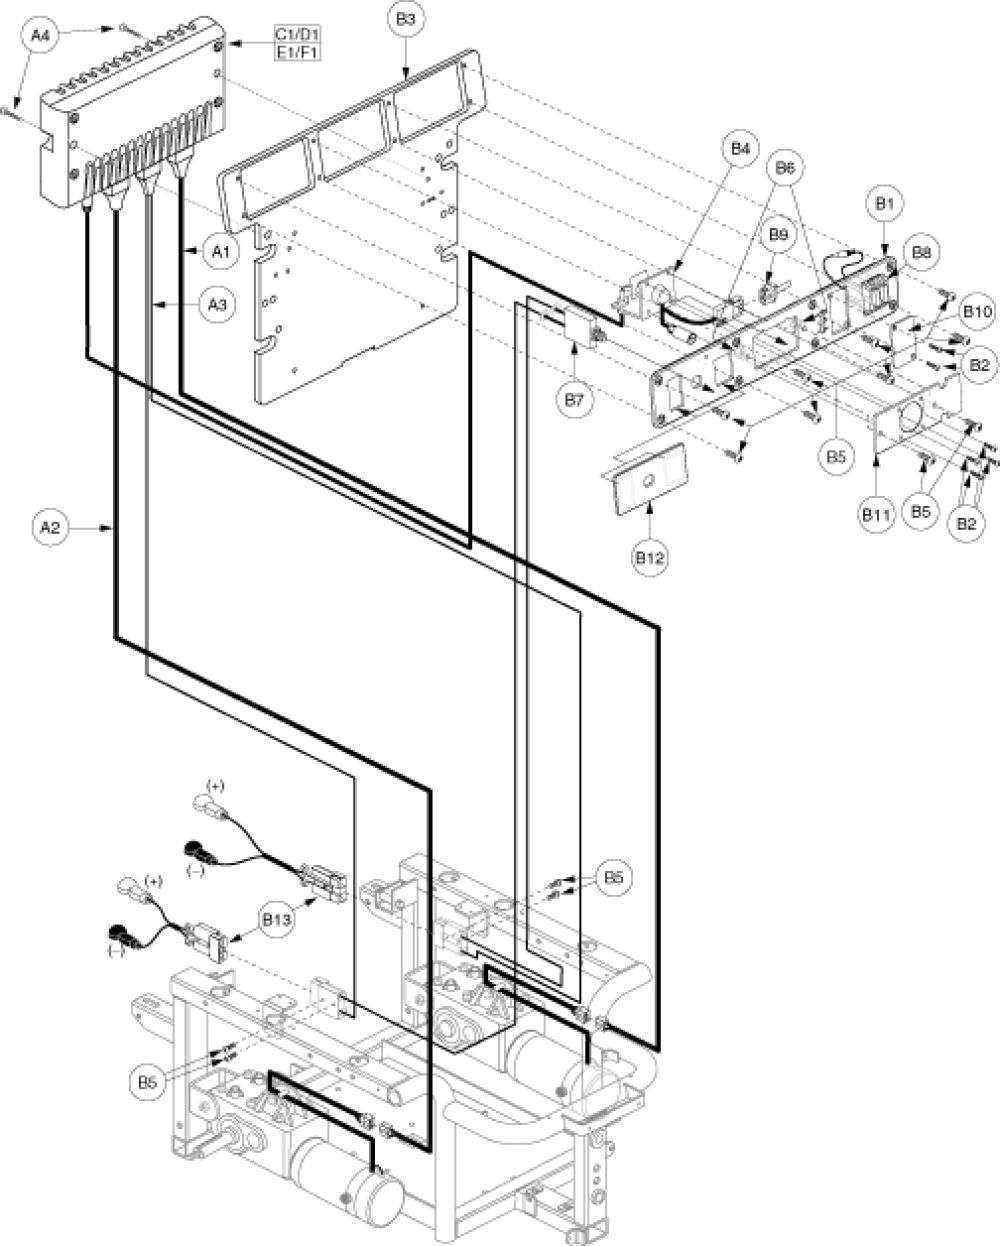 Utility Tray Assembly - Remote Plus, Off-board parts diagram